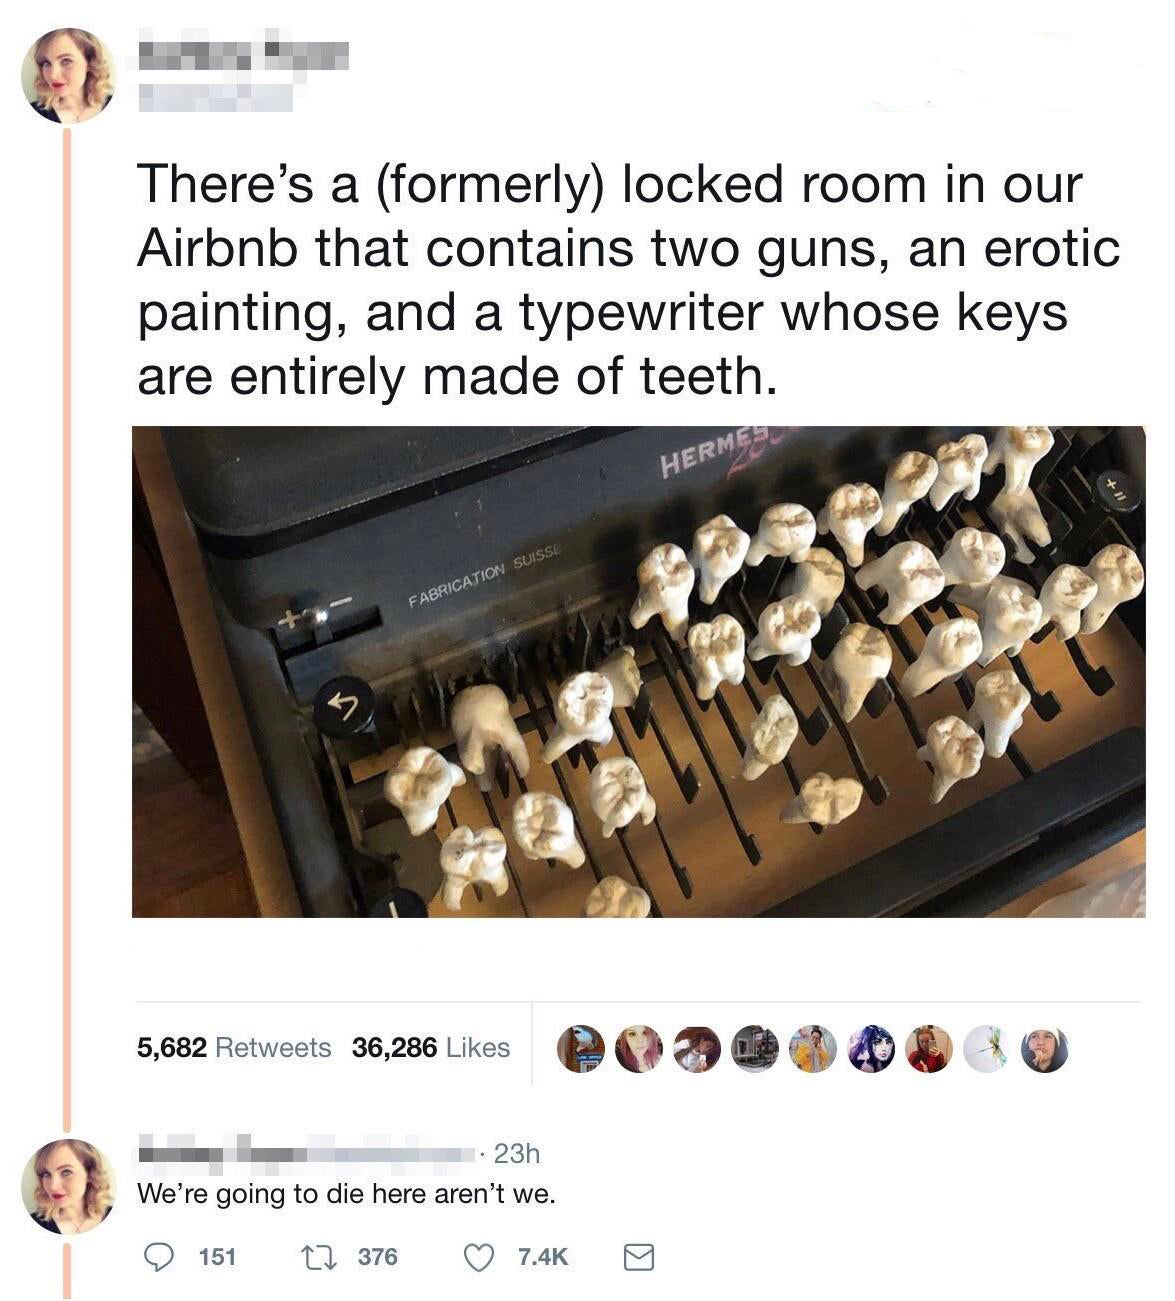 airbnb typewriter teeth - There's a formerly locked room in our Airbnb that contains two guns, an erotic painting, and a typewriter whose keys are entirely made of teeth. Herm 5,682 36,286 @ a . 23h We're going to die here aren't we. 151 17 376